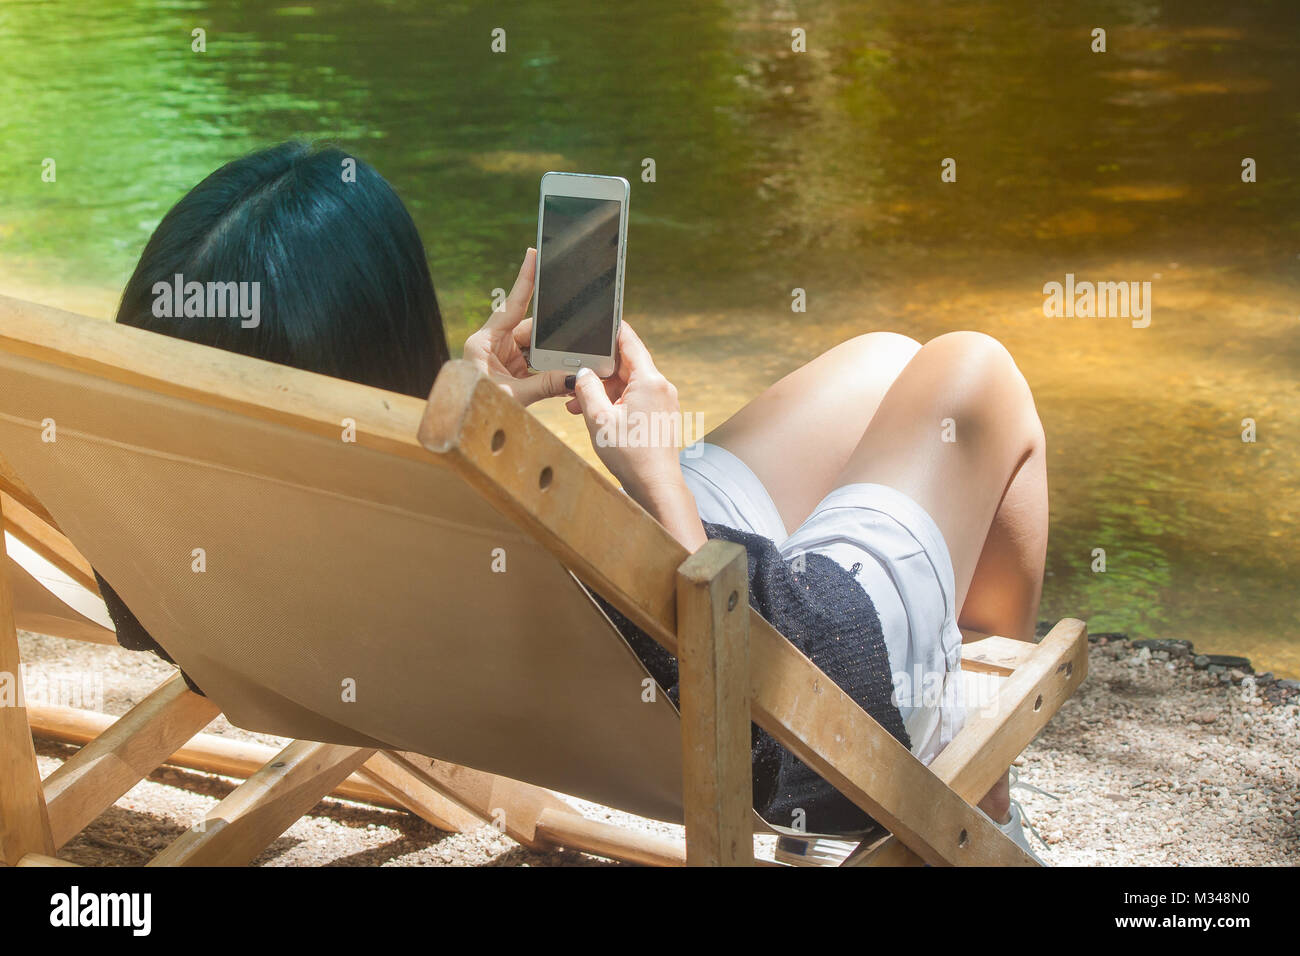 Relaxation Concept : Woman sitting on wooden bench beside the river and holding hers smartphone. Stock Photo